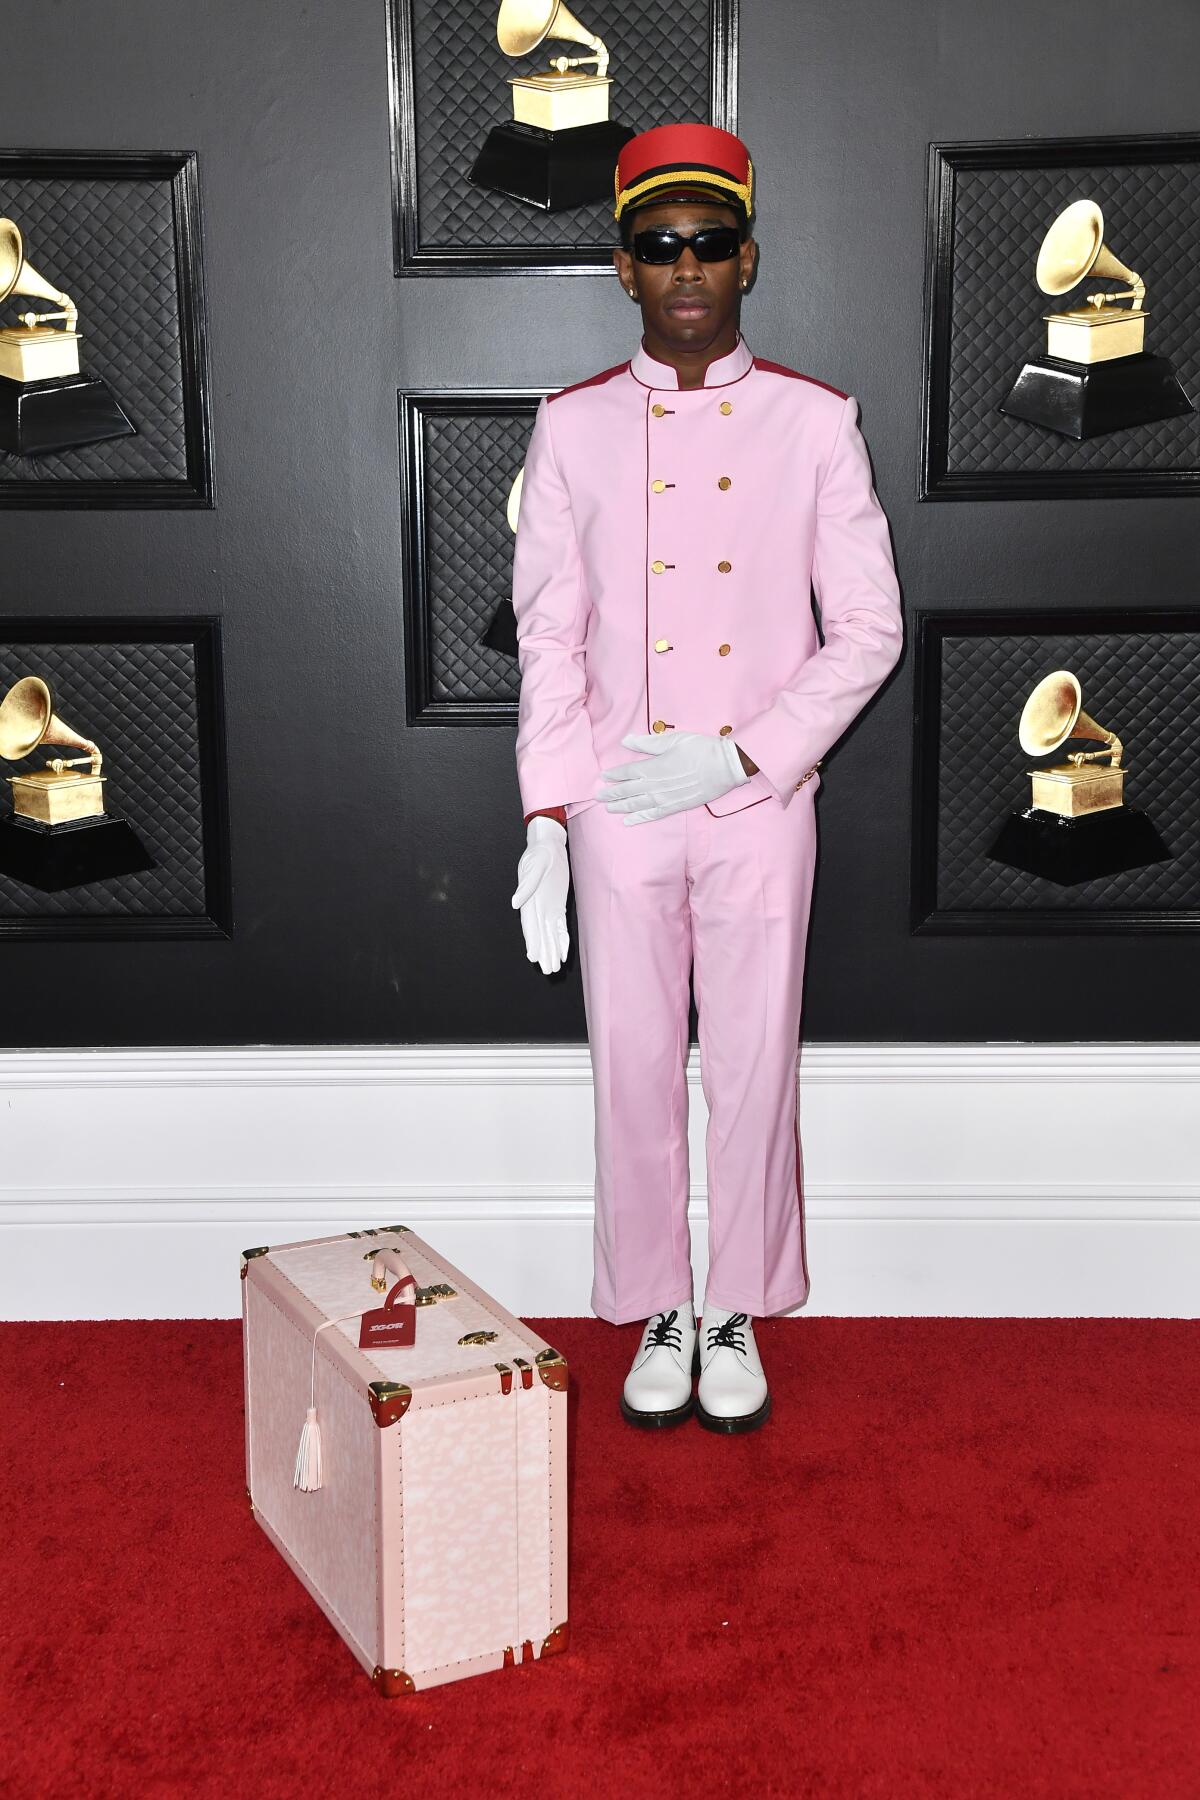 Tyler, the Creator and other artists have contended the Grammys marginalize hip-hop and R&B.